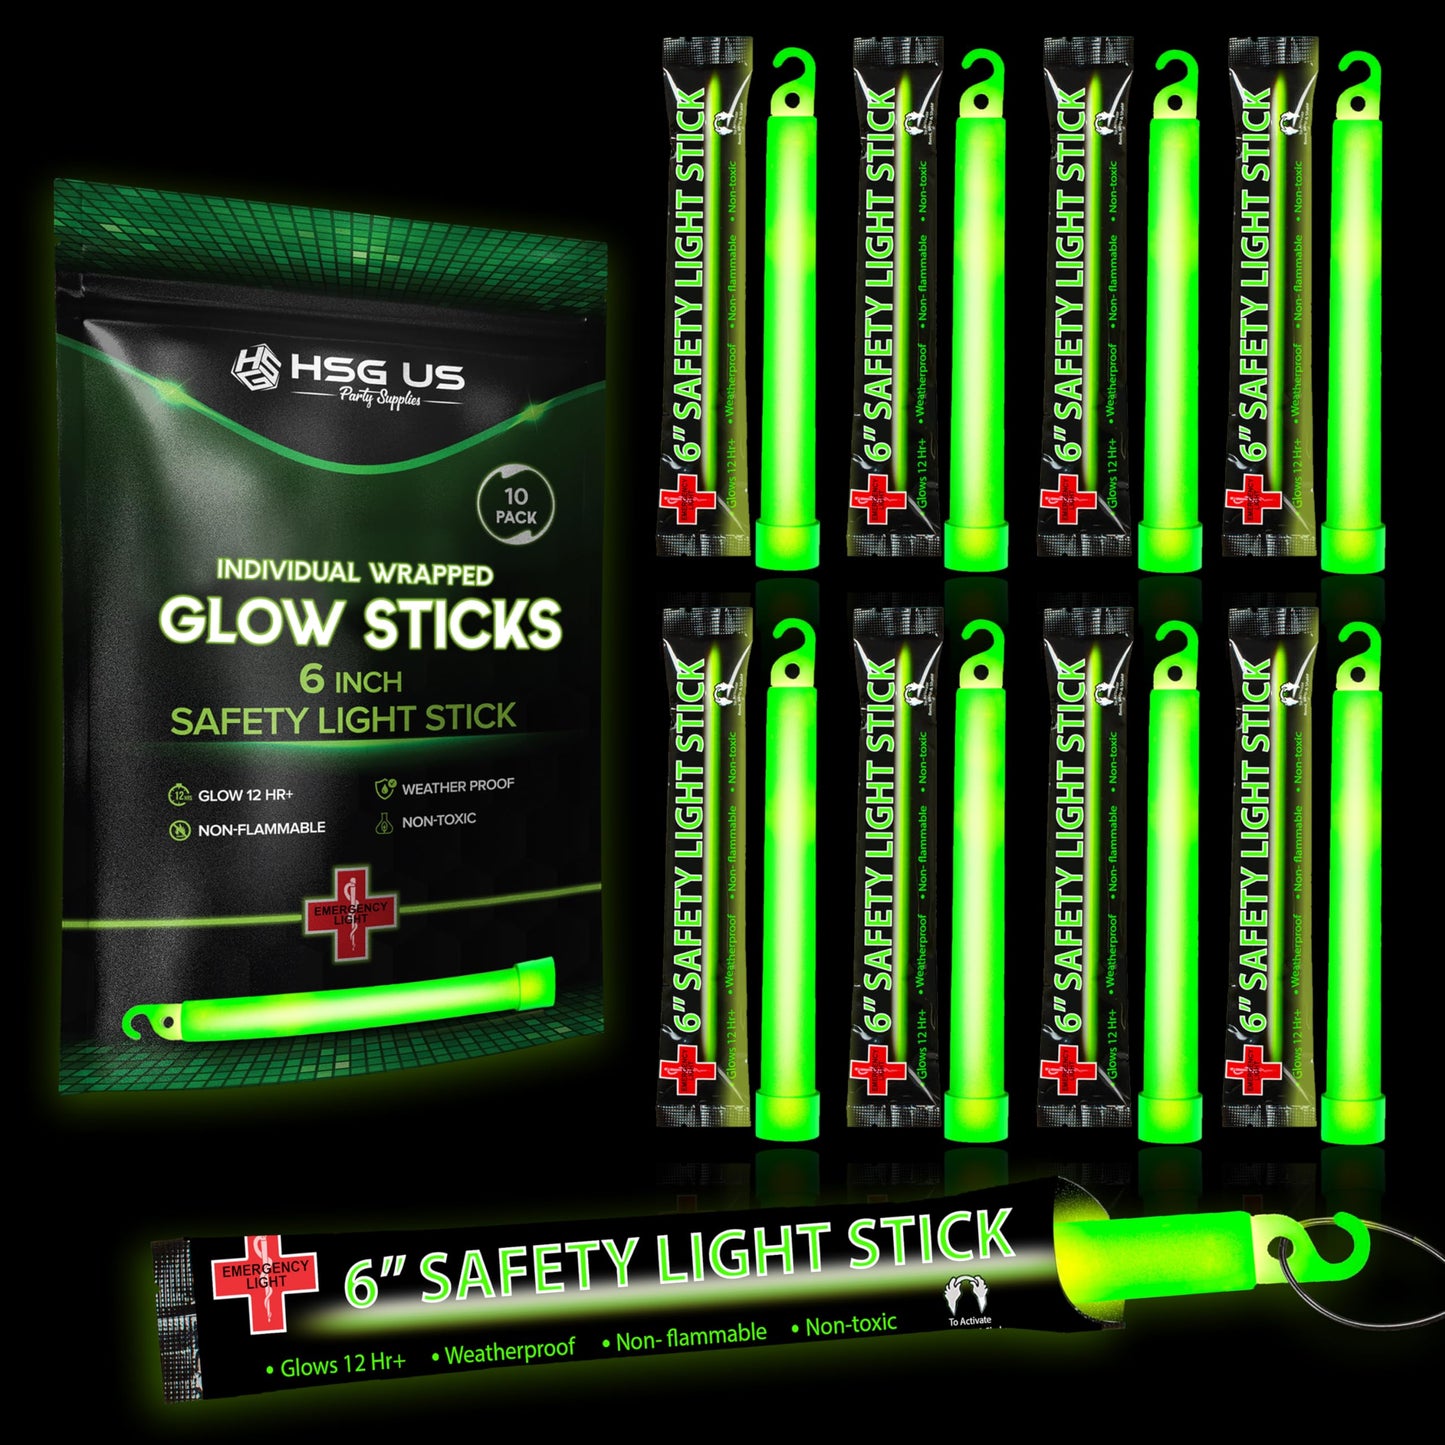 10 Ultra Bright Green Glow Sticks - Individual Packed With Lanyard - For Camping, Emergency Survival - Glow Lights for Blackouts, Hurricane and Storms- 6 Inch Chem Light Sticks with 12 Hour Duration